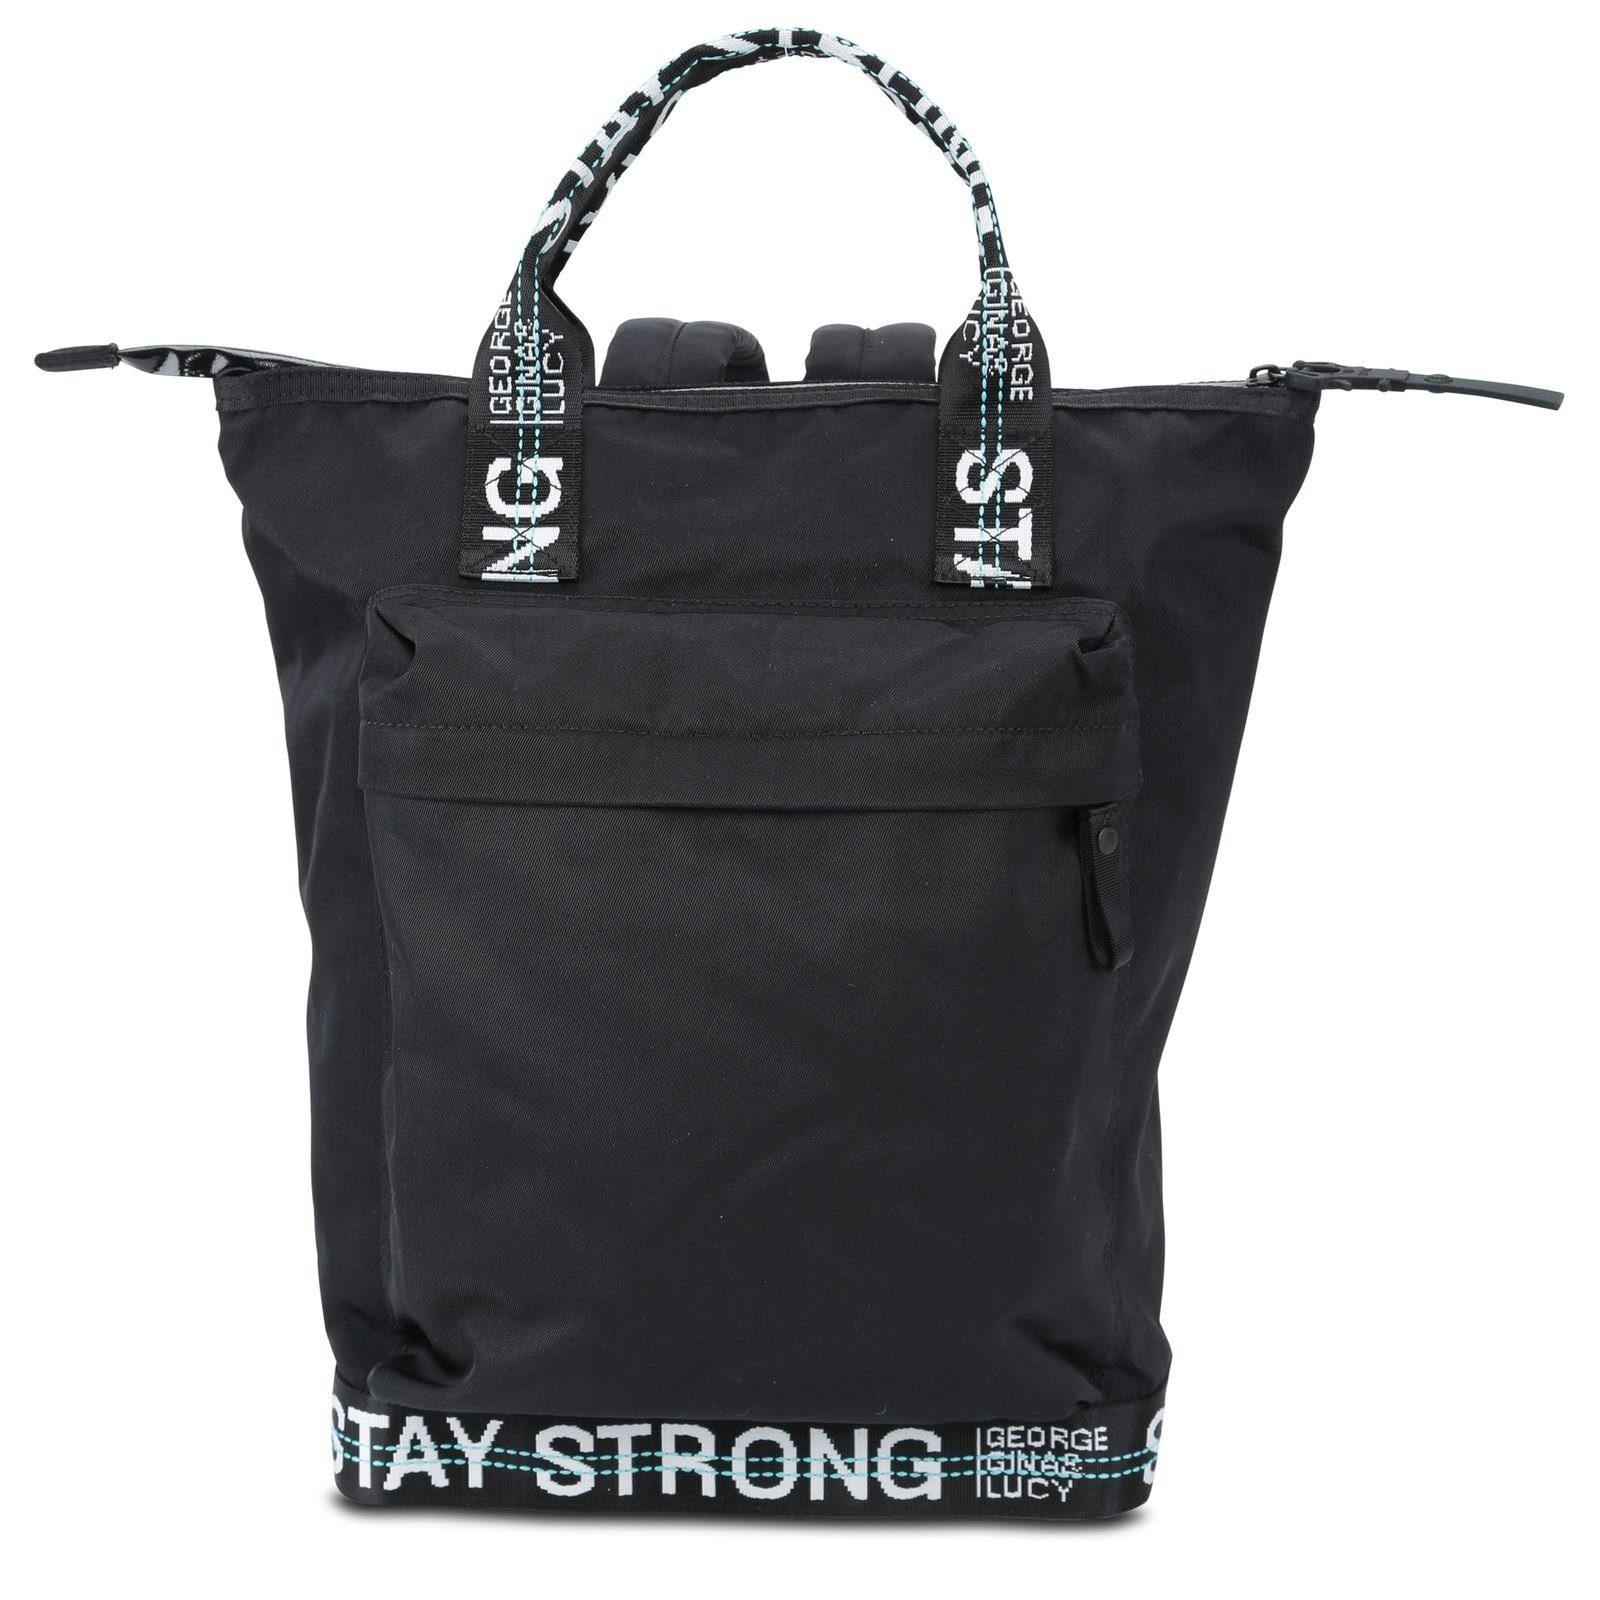 Rucksack George Roots Gina Lucy Strong Black & Nylon